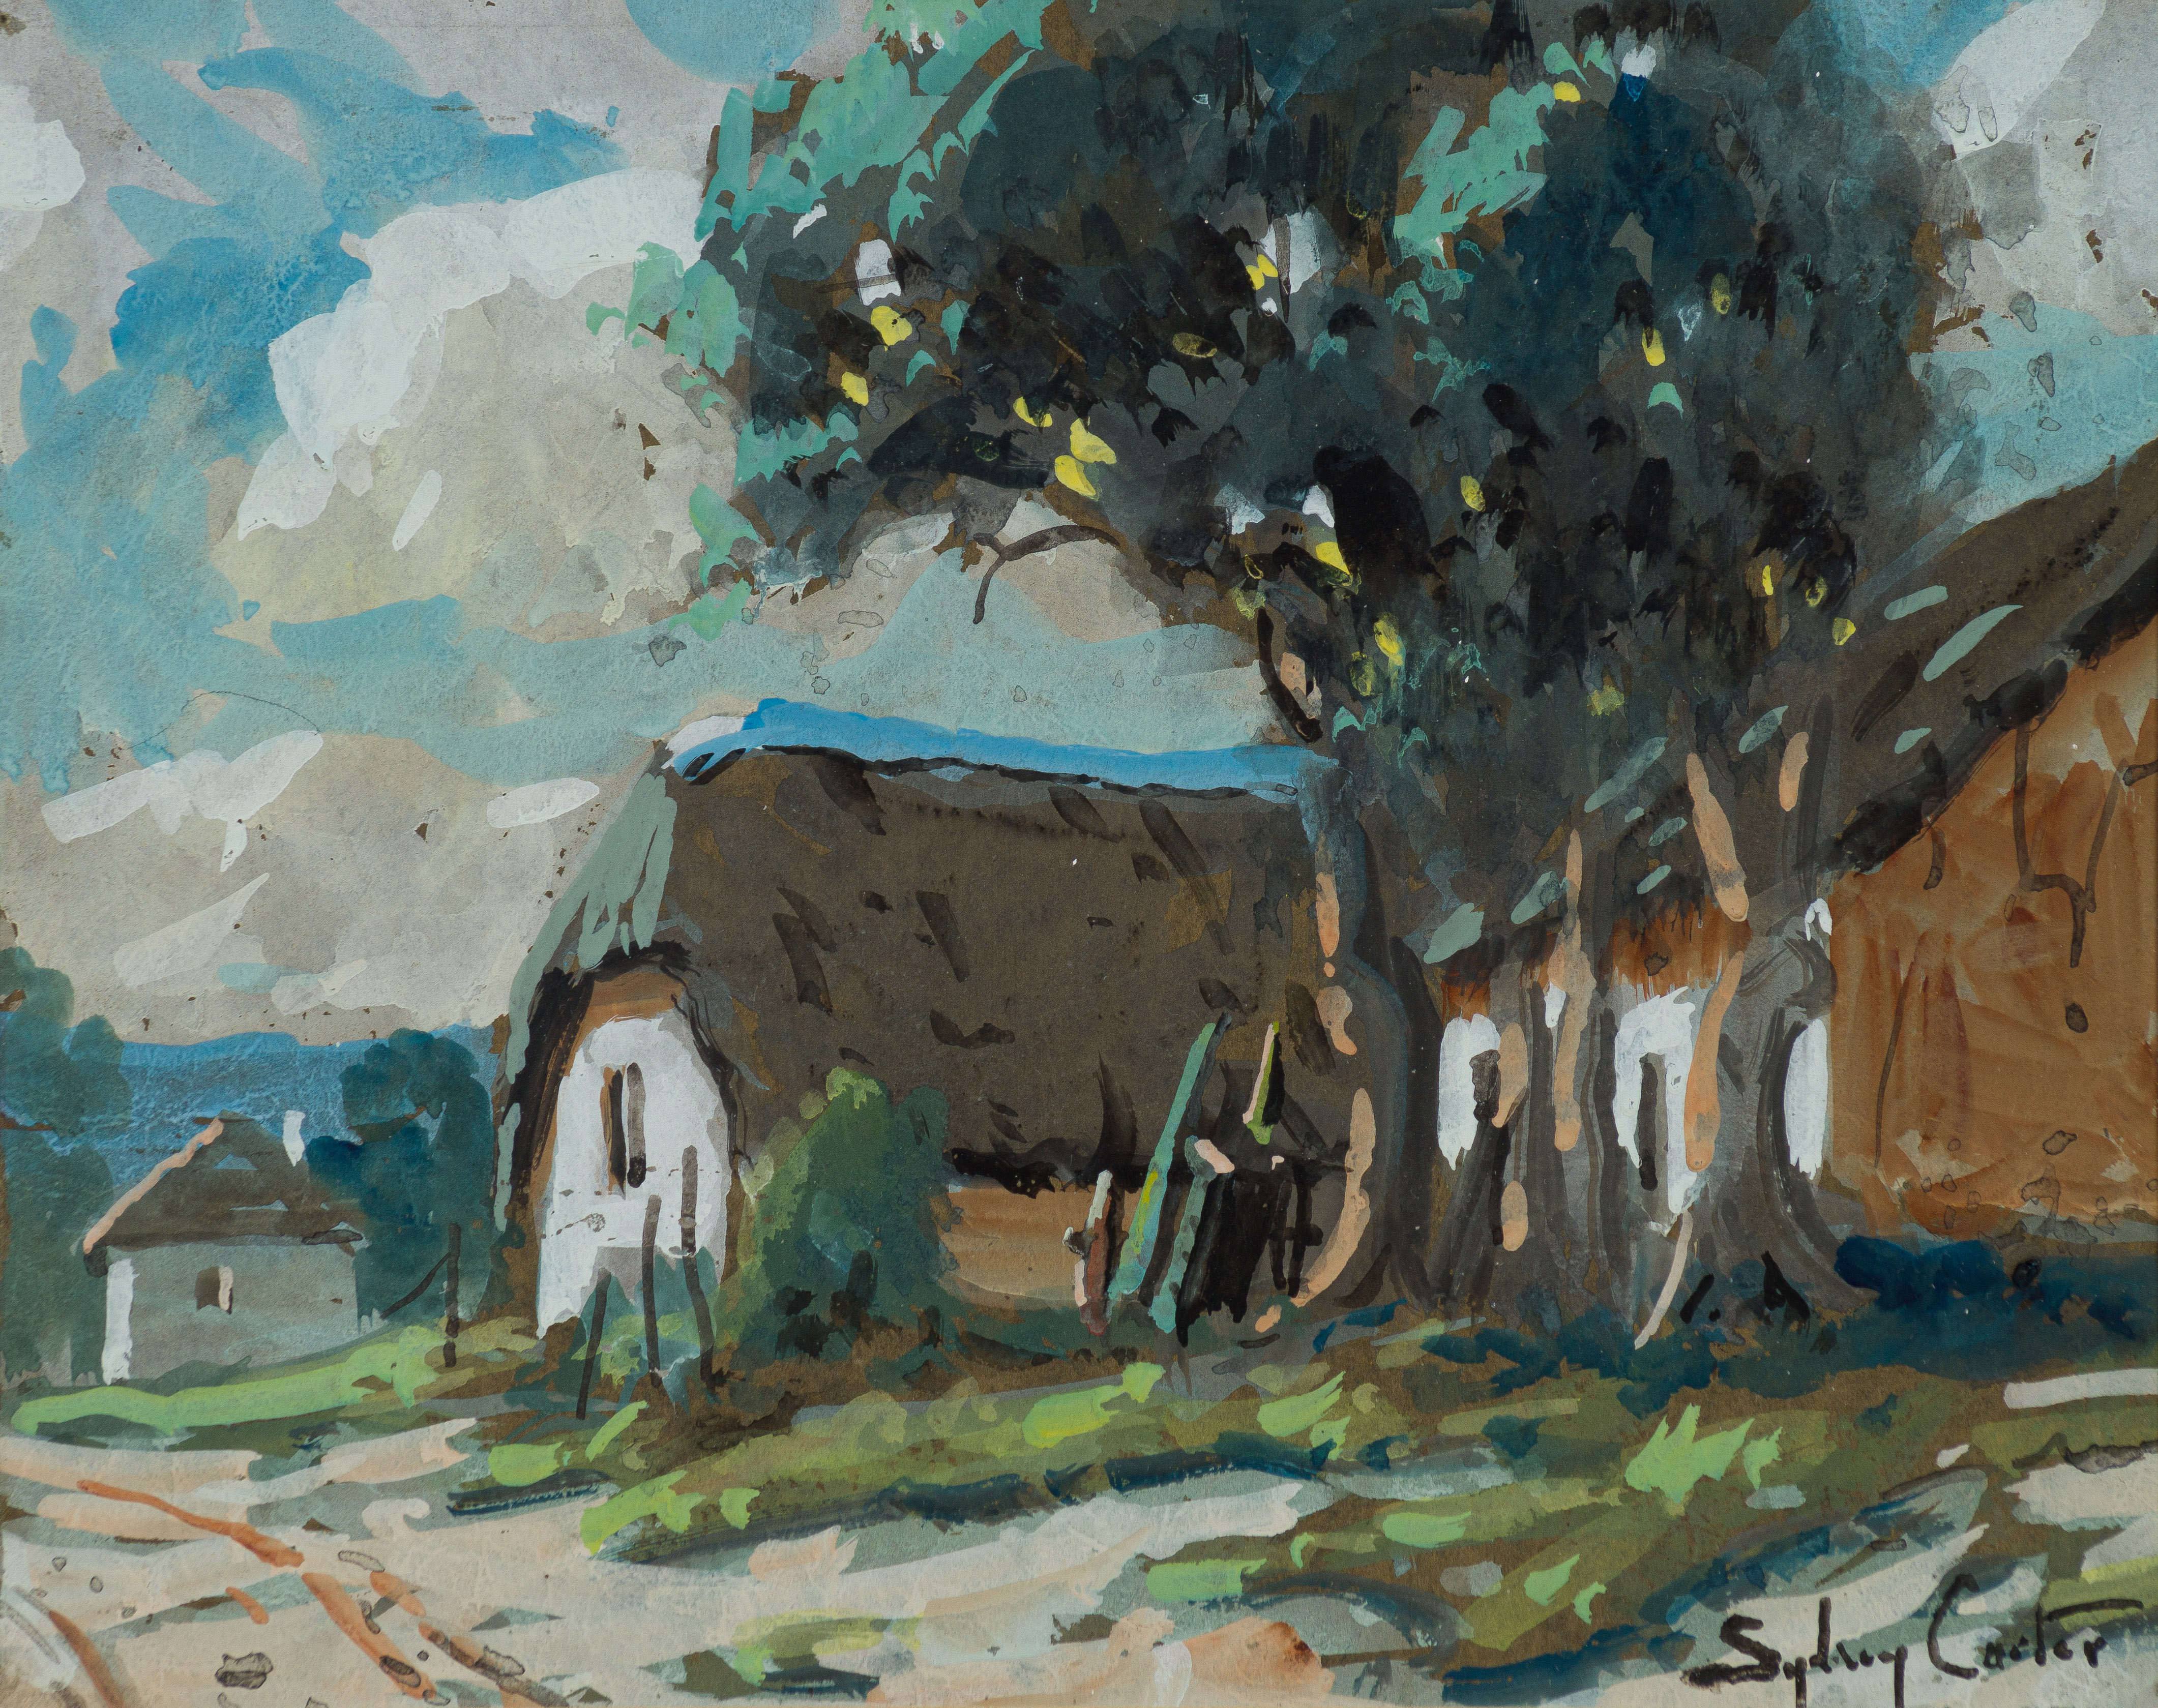 Sydney Carter; Bluegums and Thatched Houses